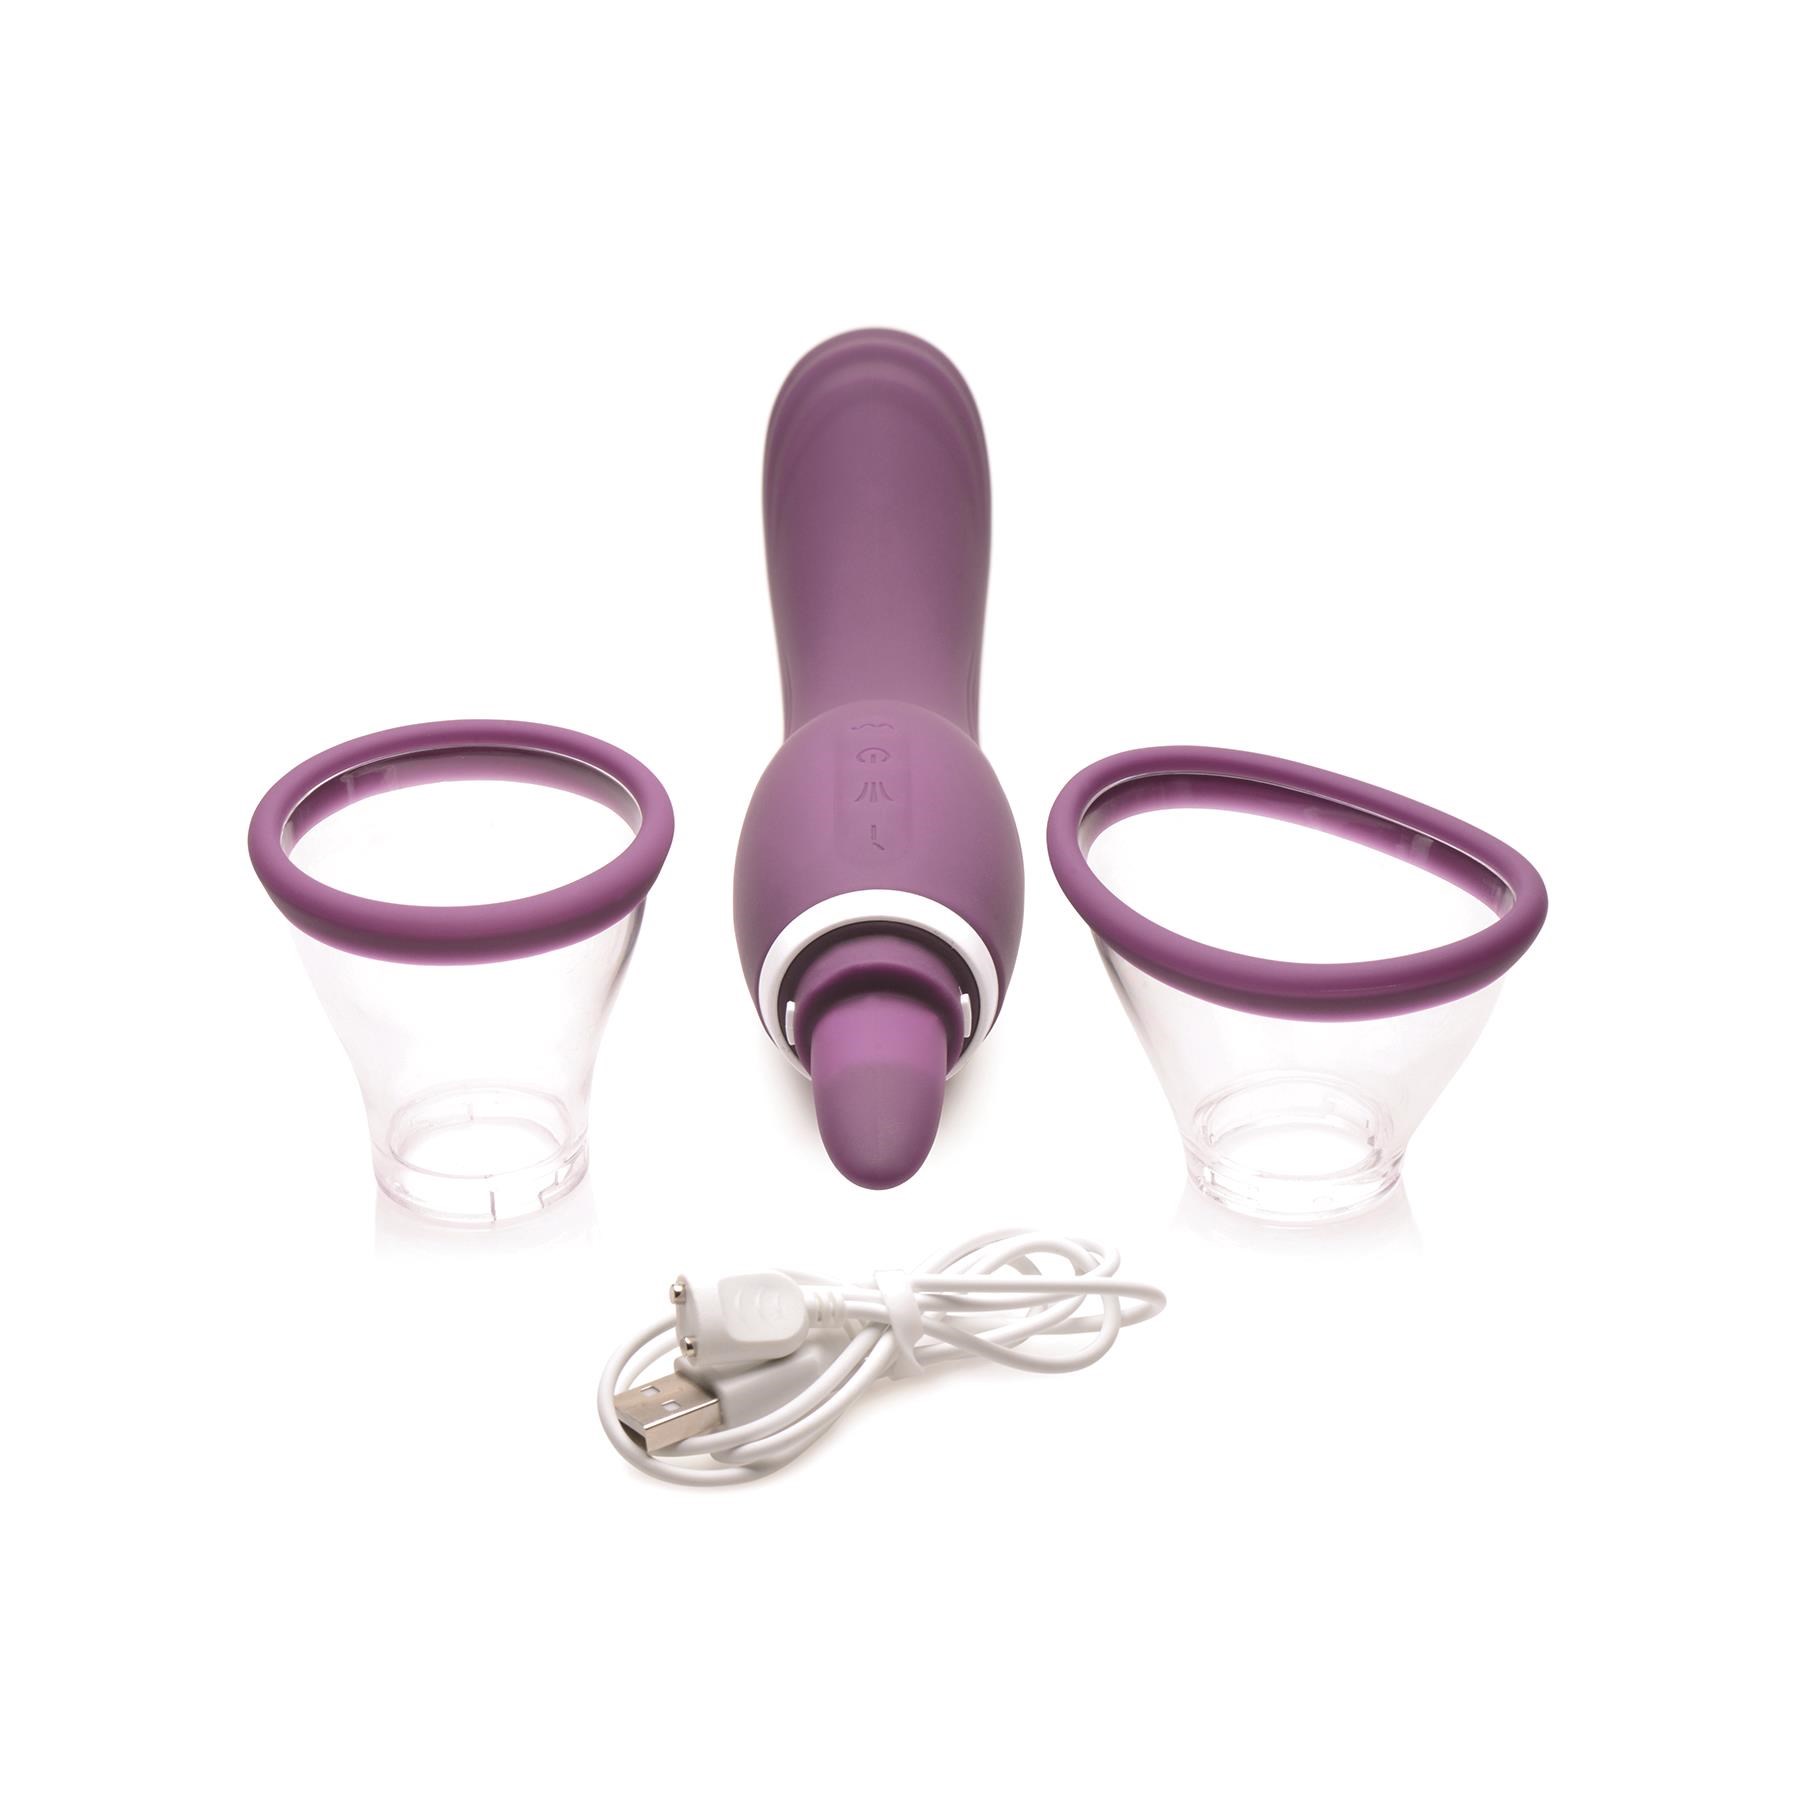 Shegasm Lickgasm Vibrating Pussy Pump - Product, Cups and USB Charger